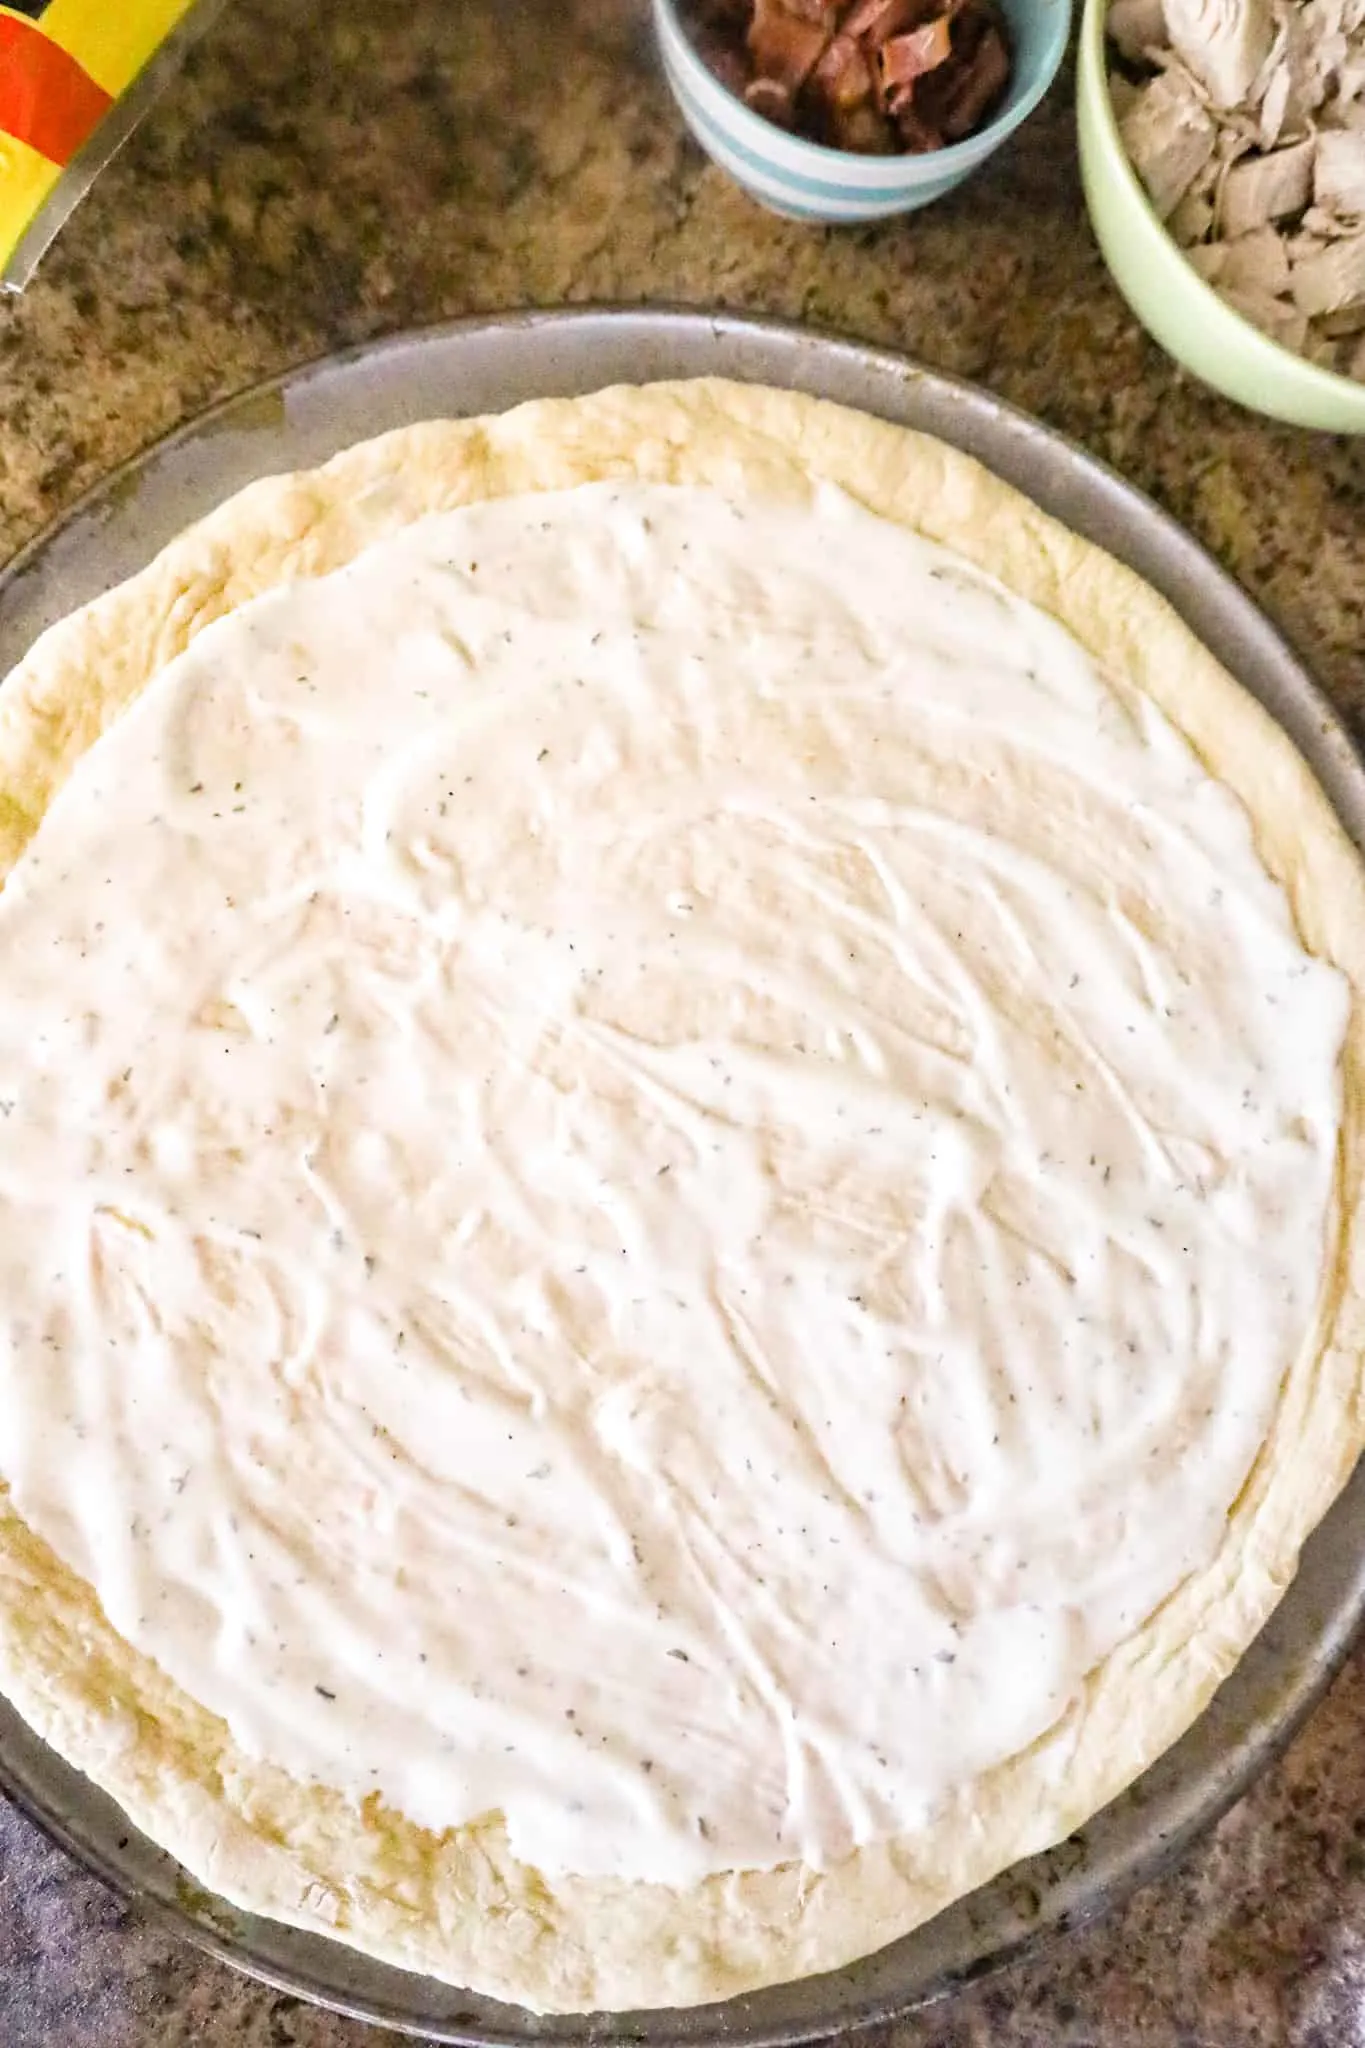 ranch dressing spread on pizza dough before baking